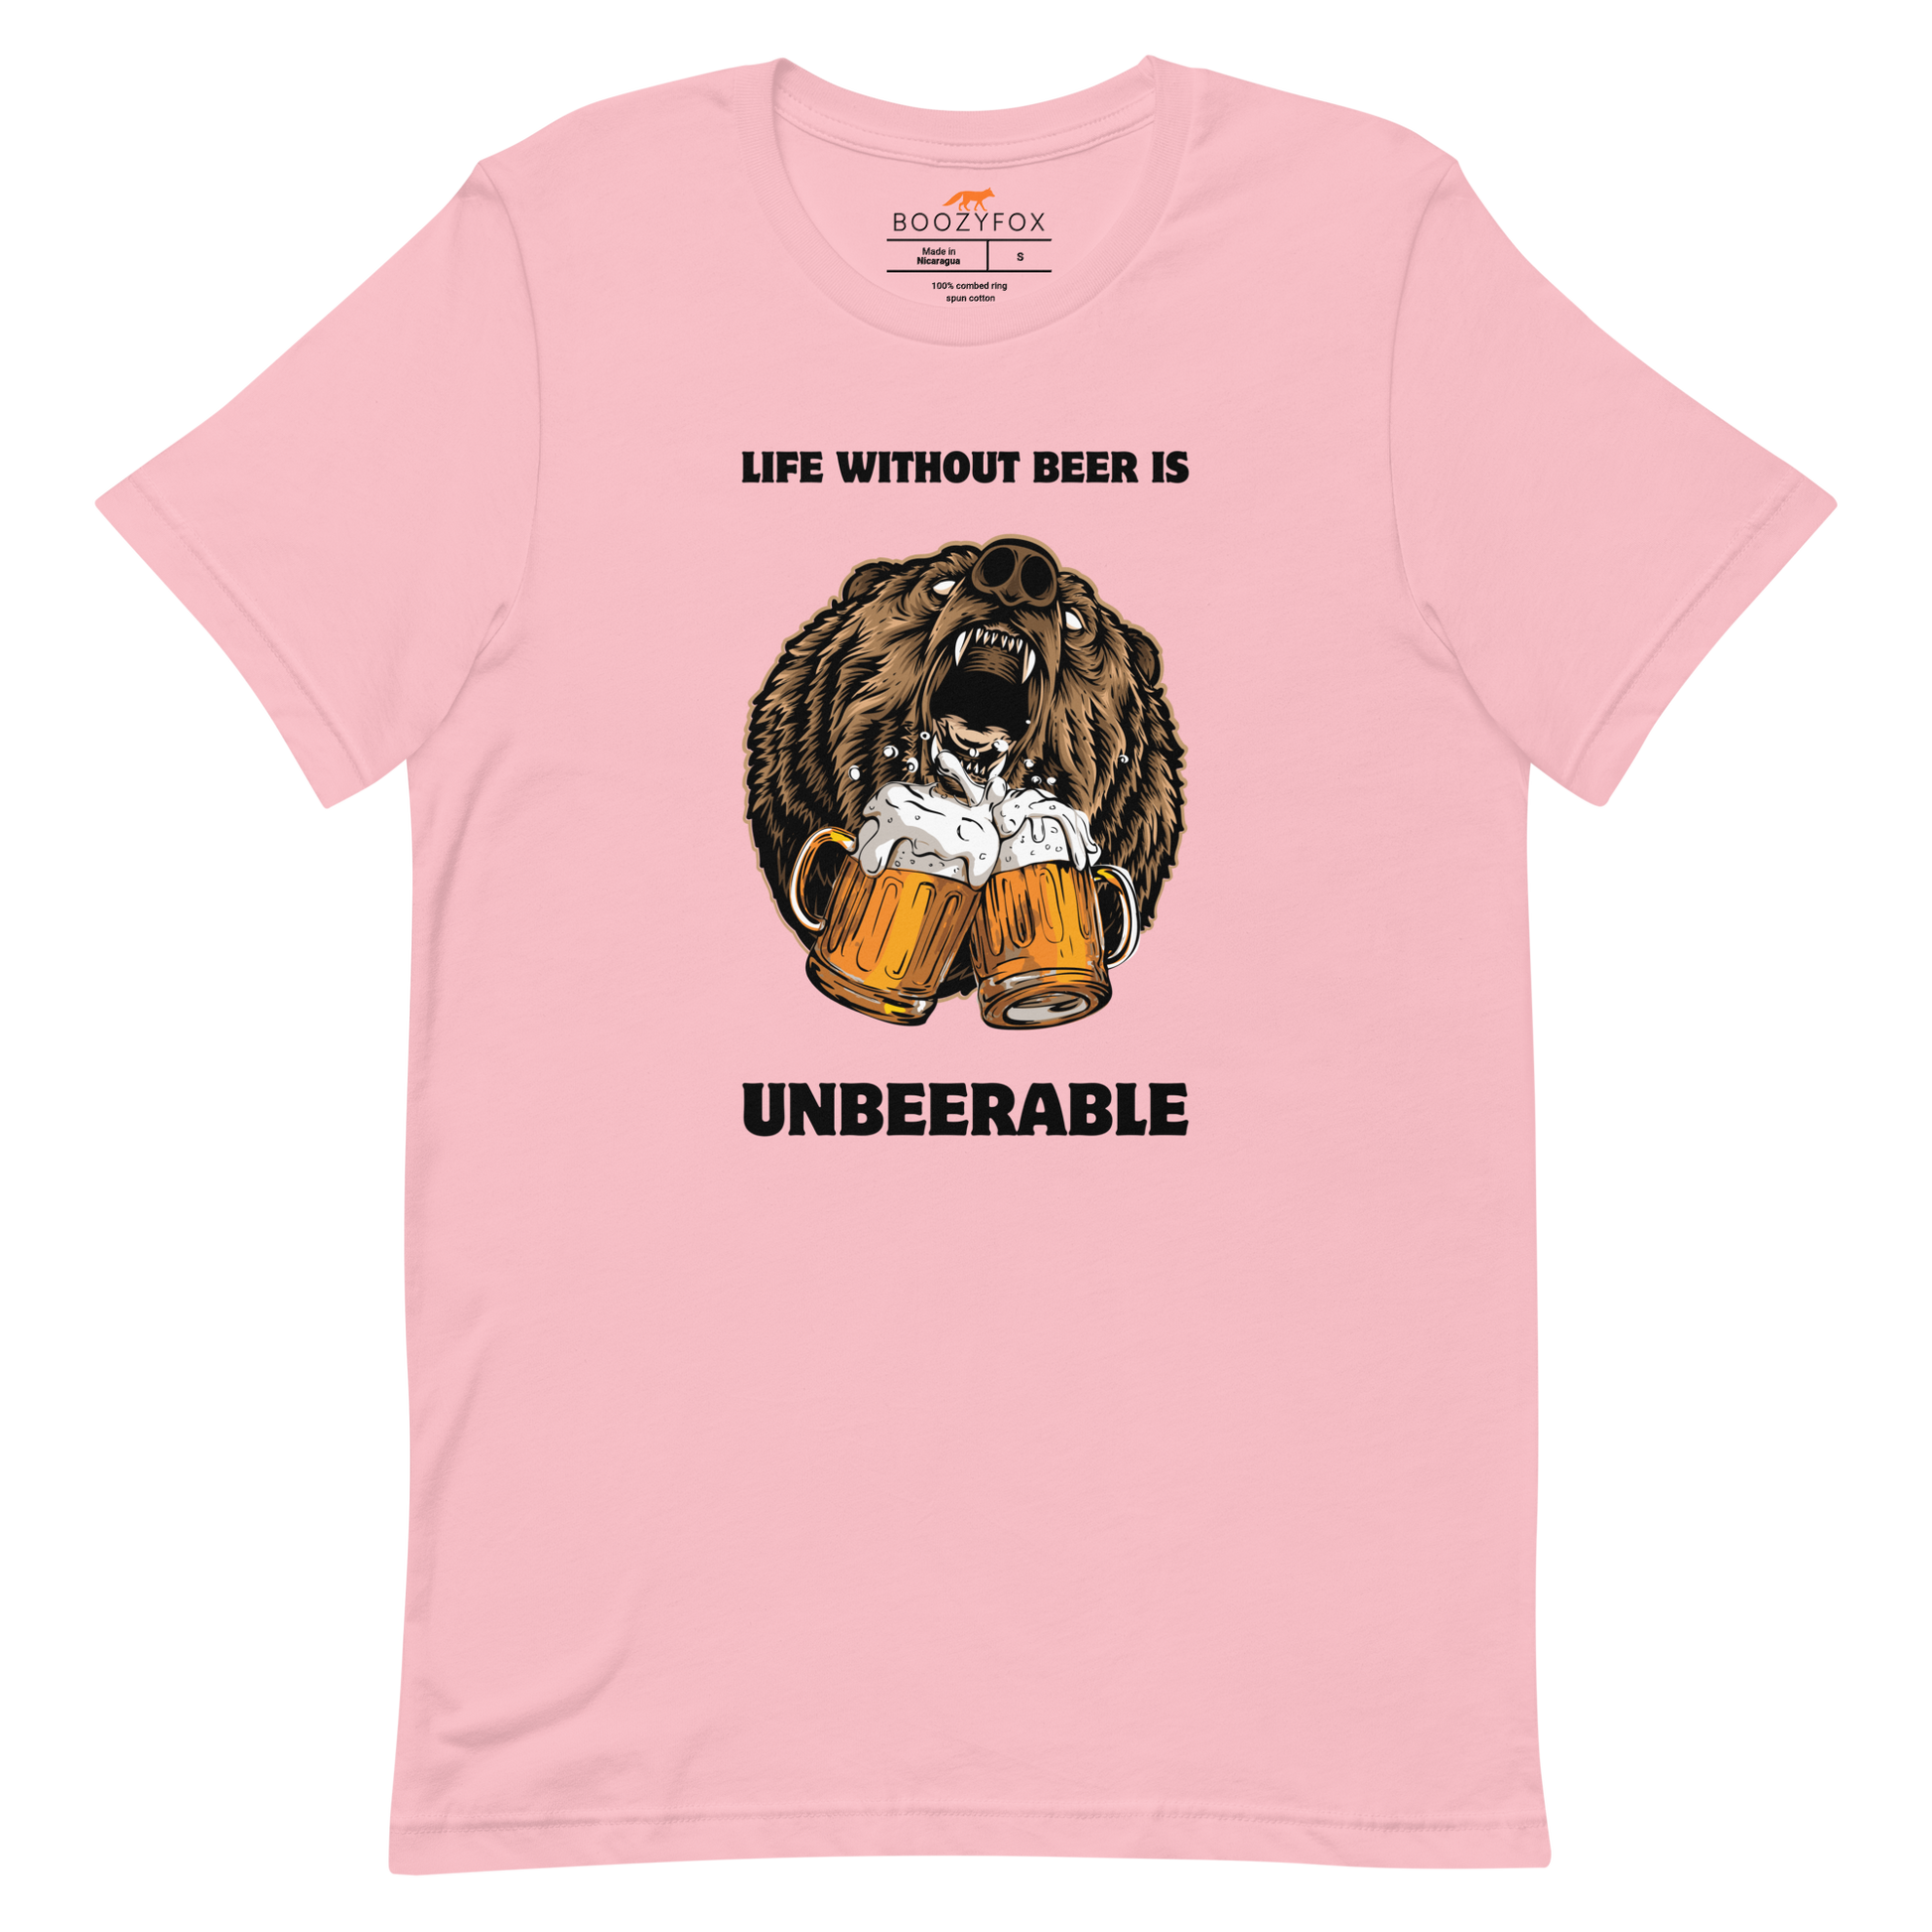 Pink Premium Bear Tee featuring a Life Without Beer Is Unbeerable graphic design on the chest - Funny Graphic Bear Tees - Boozy Fox